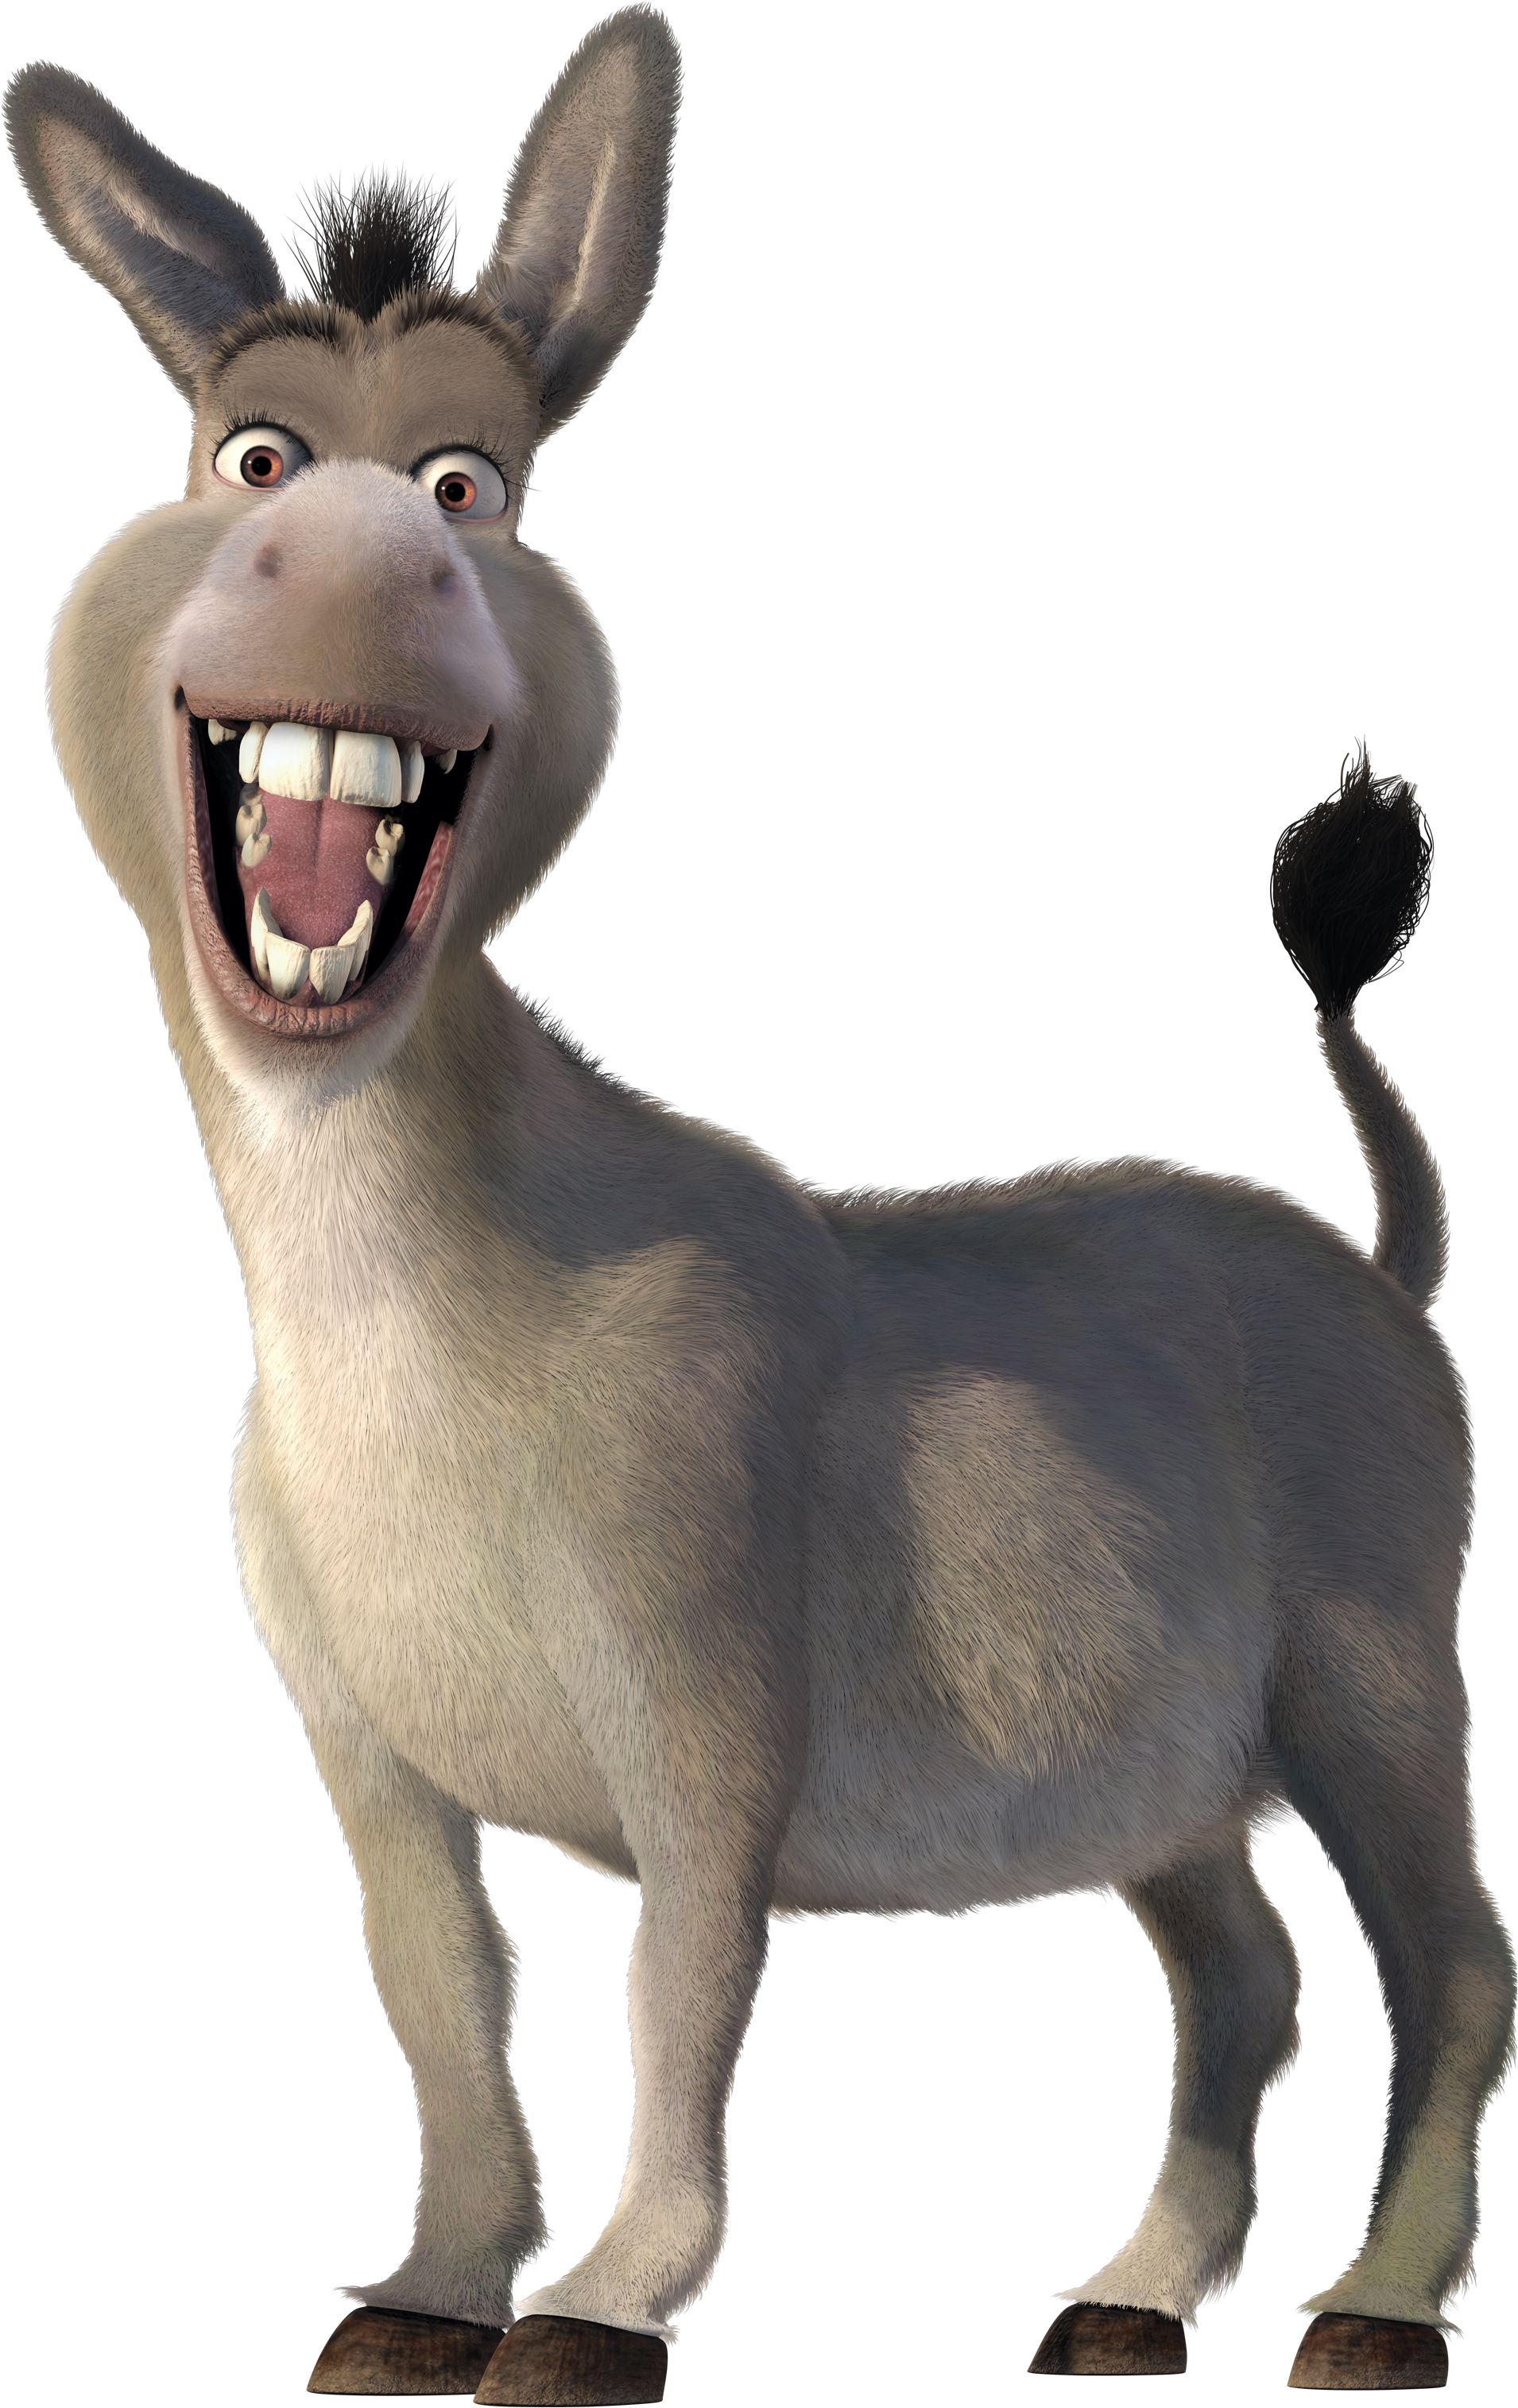 A Cartoon Donkey With Its Mouth Open